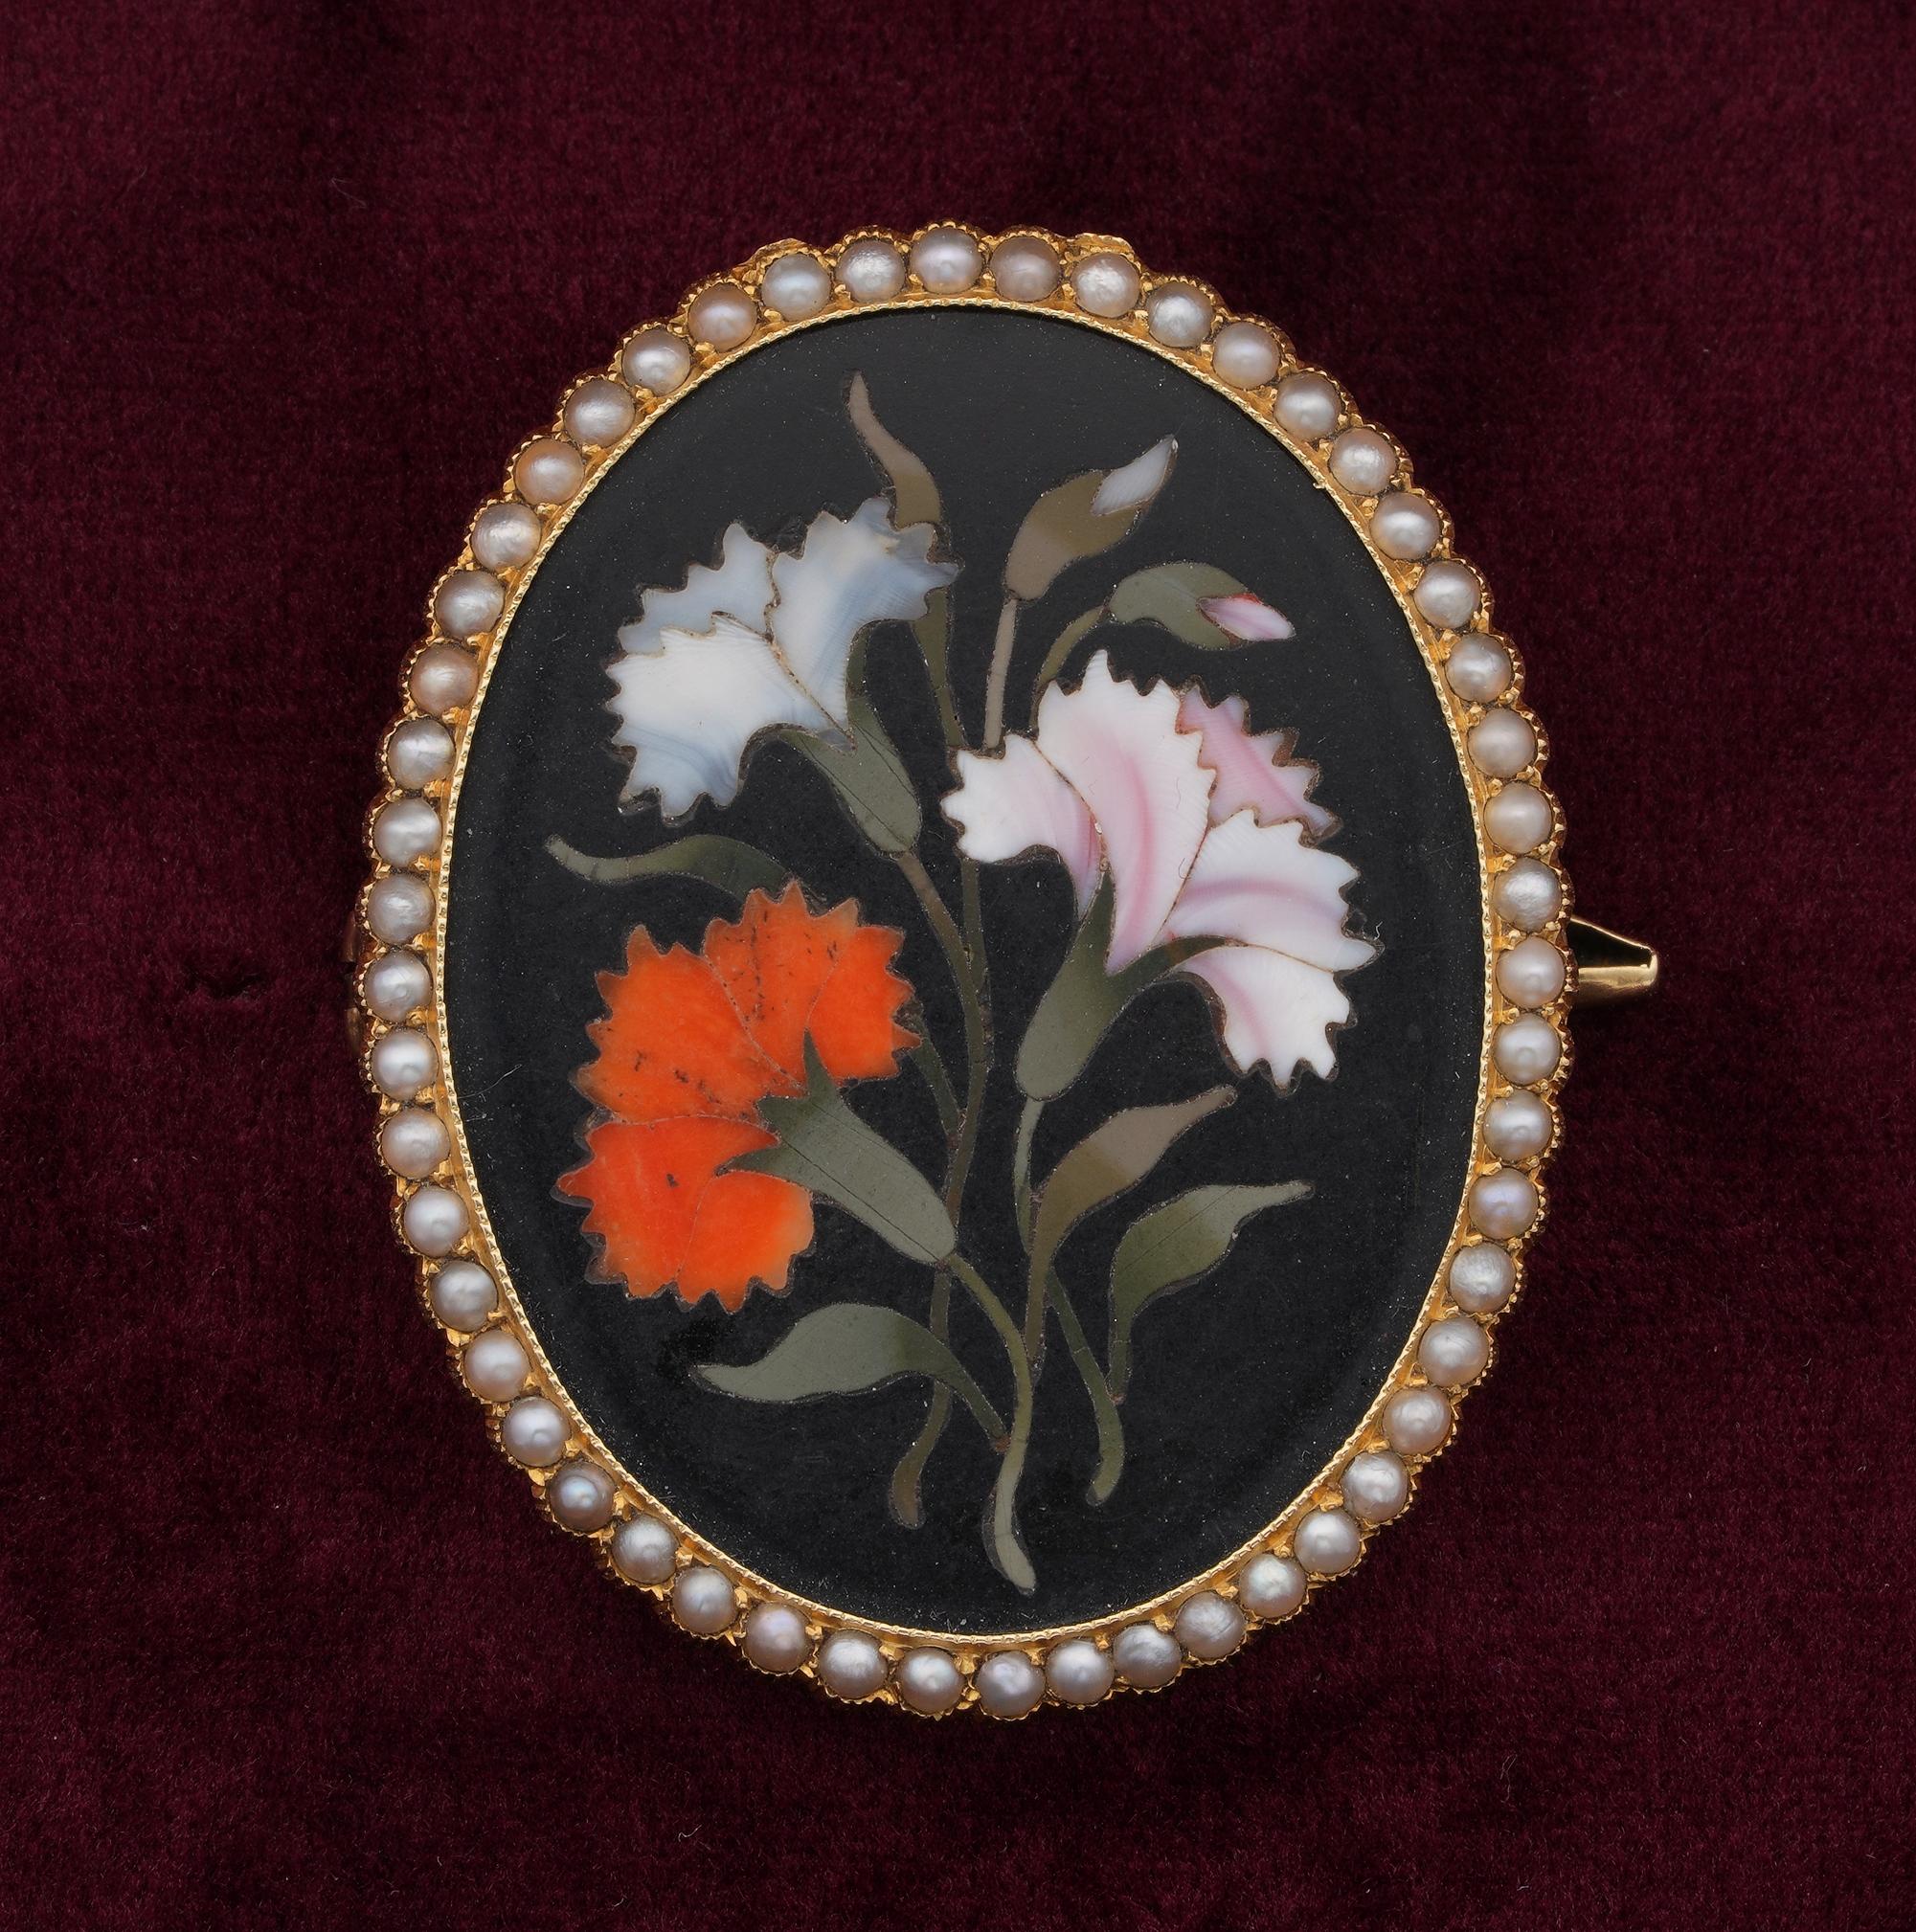 he Art Of Mosaic

Antique Victorian Period 1870 ca Florentine Pietra Dura Mosaic depicting Carnation flowers as Symbol of Purity and good luck in the flowers language
Colourful, rich flower composition, skilful inlayed into black slate background,